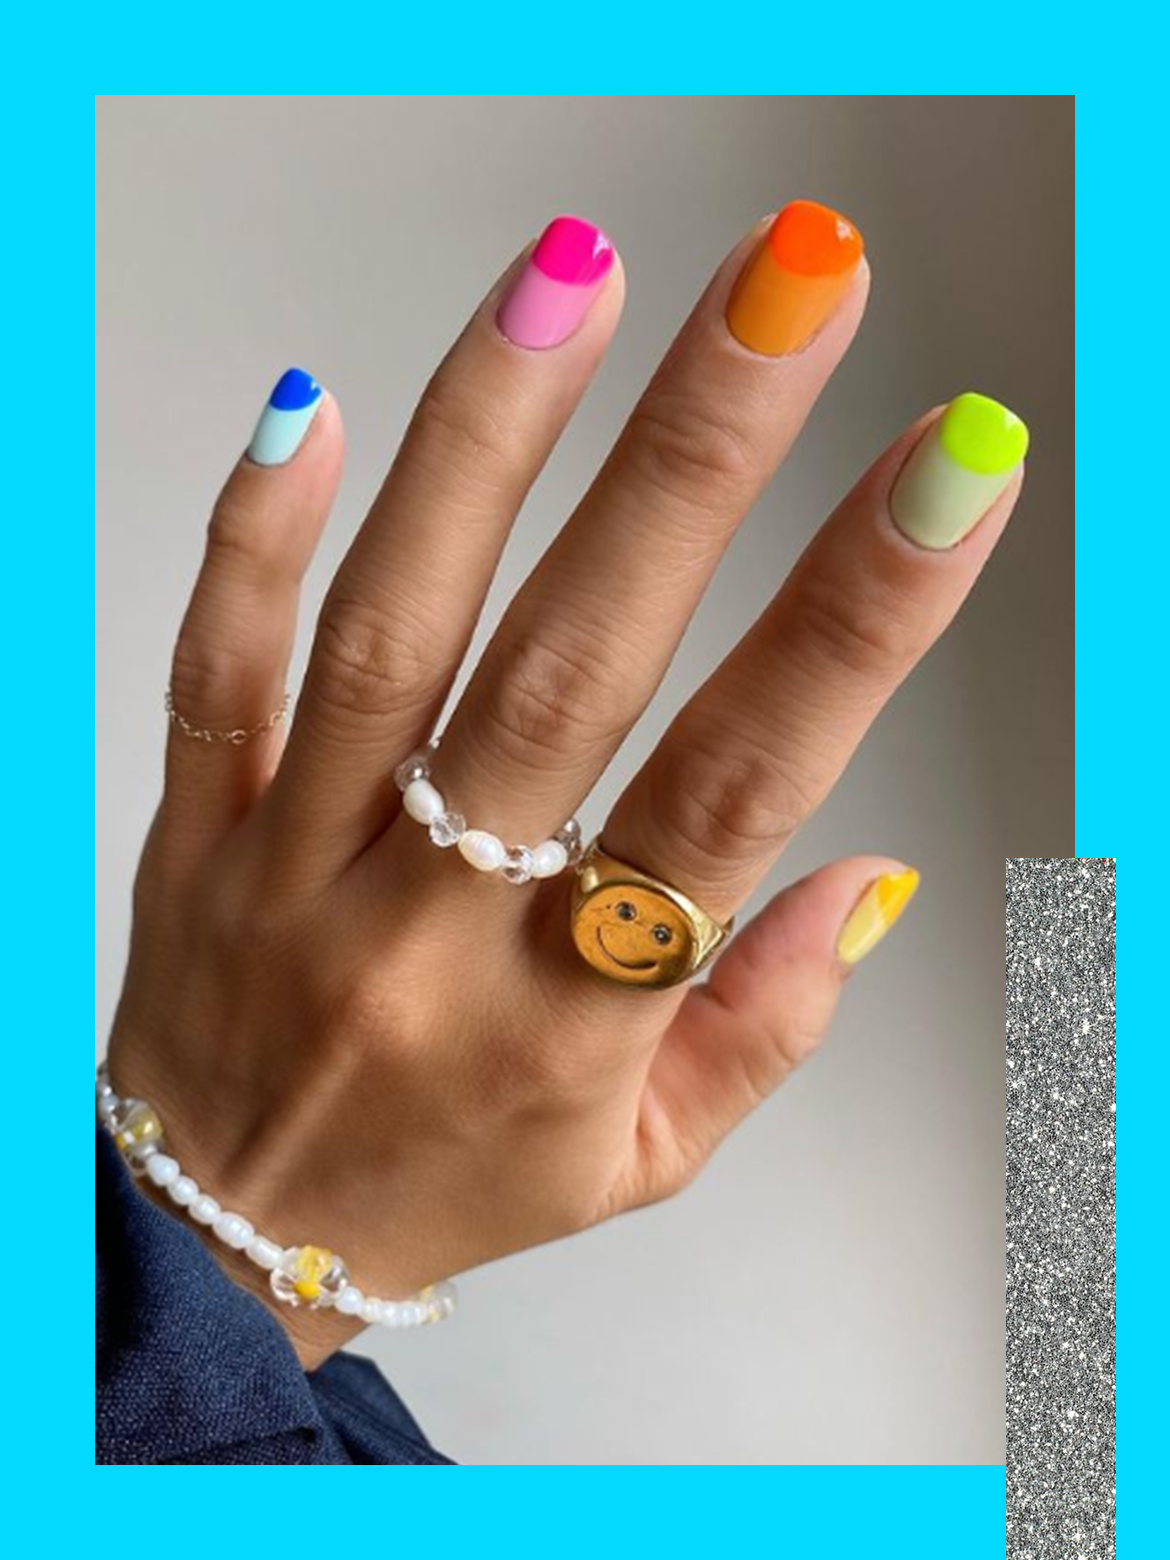 The Prettiest Neon Nail Designs To Try For Your Next Manicure ...